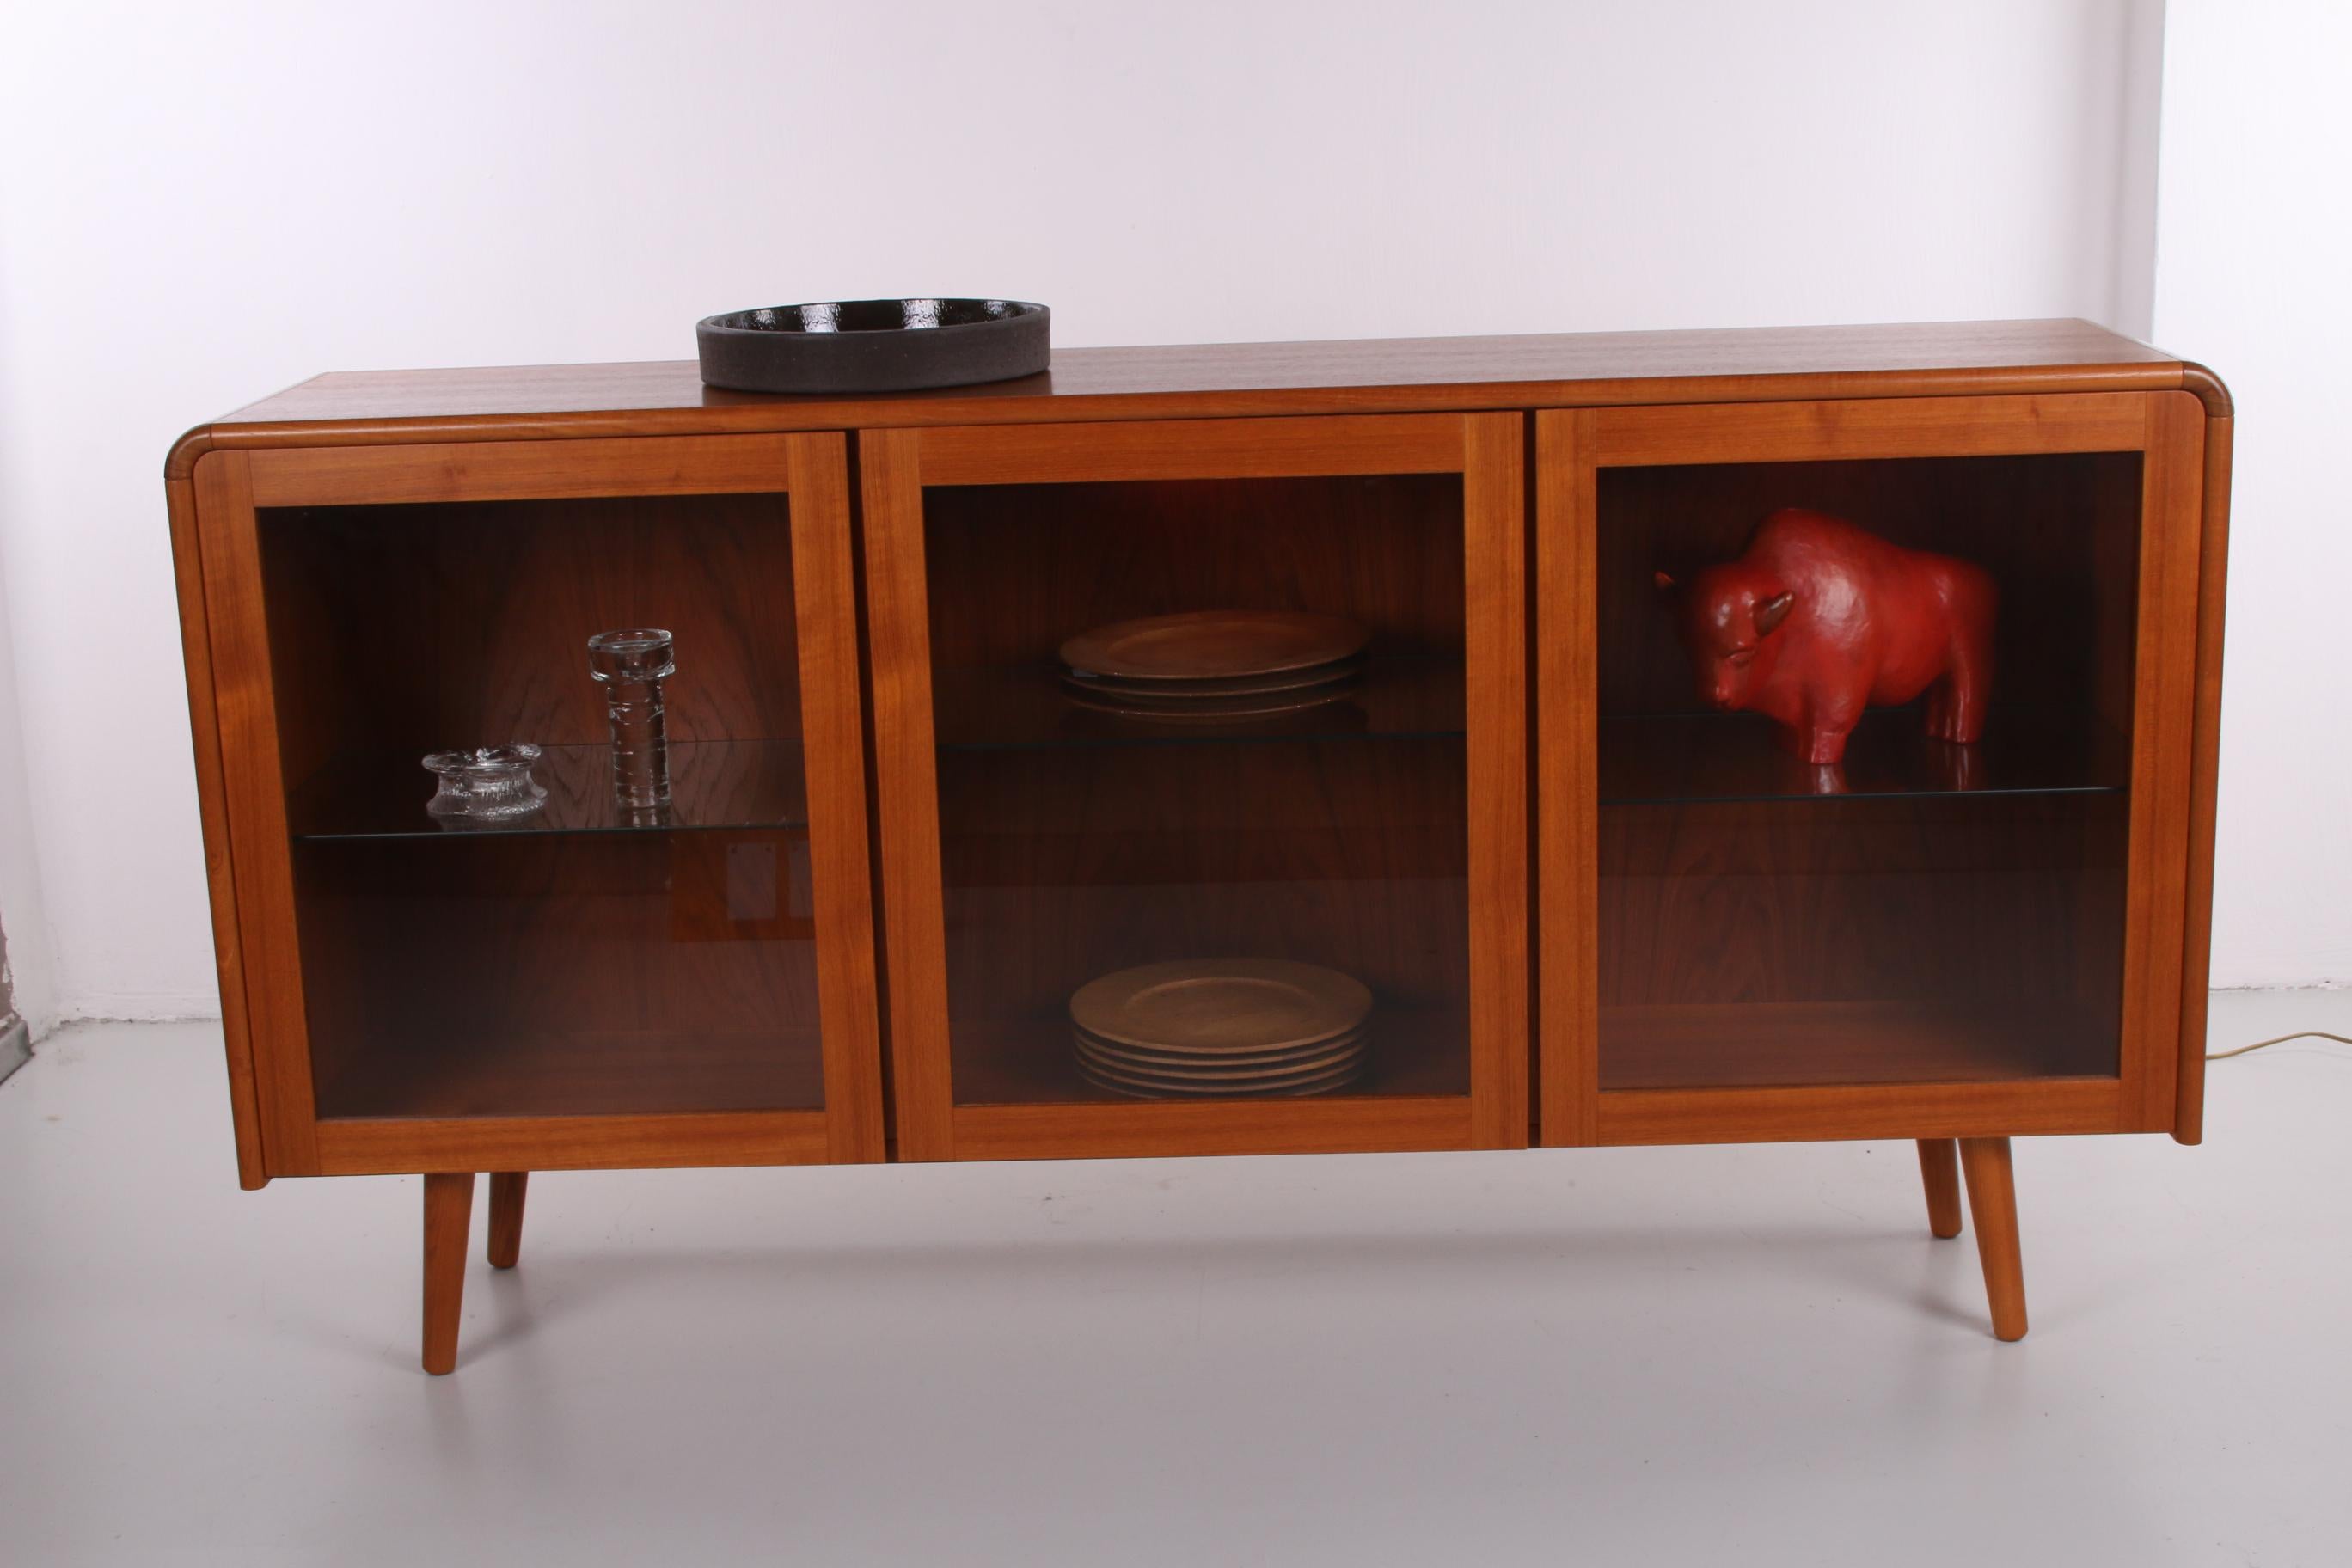 Danish design sideboard display cabinet with lighting 1960s Made in Denmark


Danish design sideboard display cabinet with lighting 1960s Made in Denmark.
Beautiful vintage sideboard / display cabinet to store all your things.

Definitely an